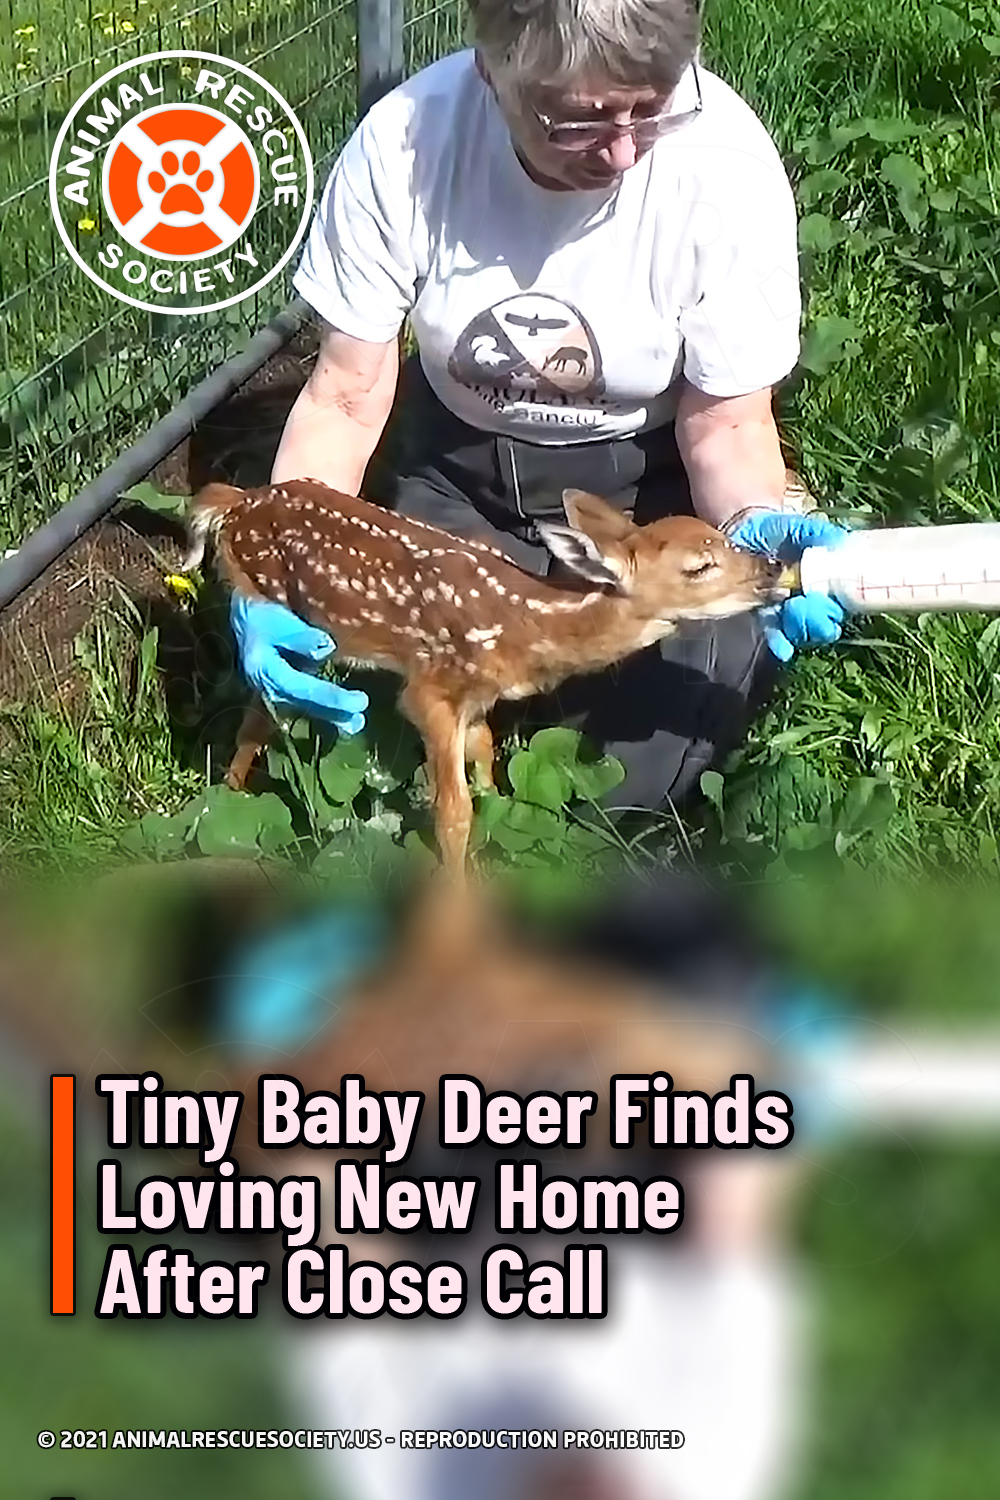 Tiny Baby Deer Finds Loving New Home After Close Call